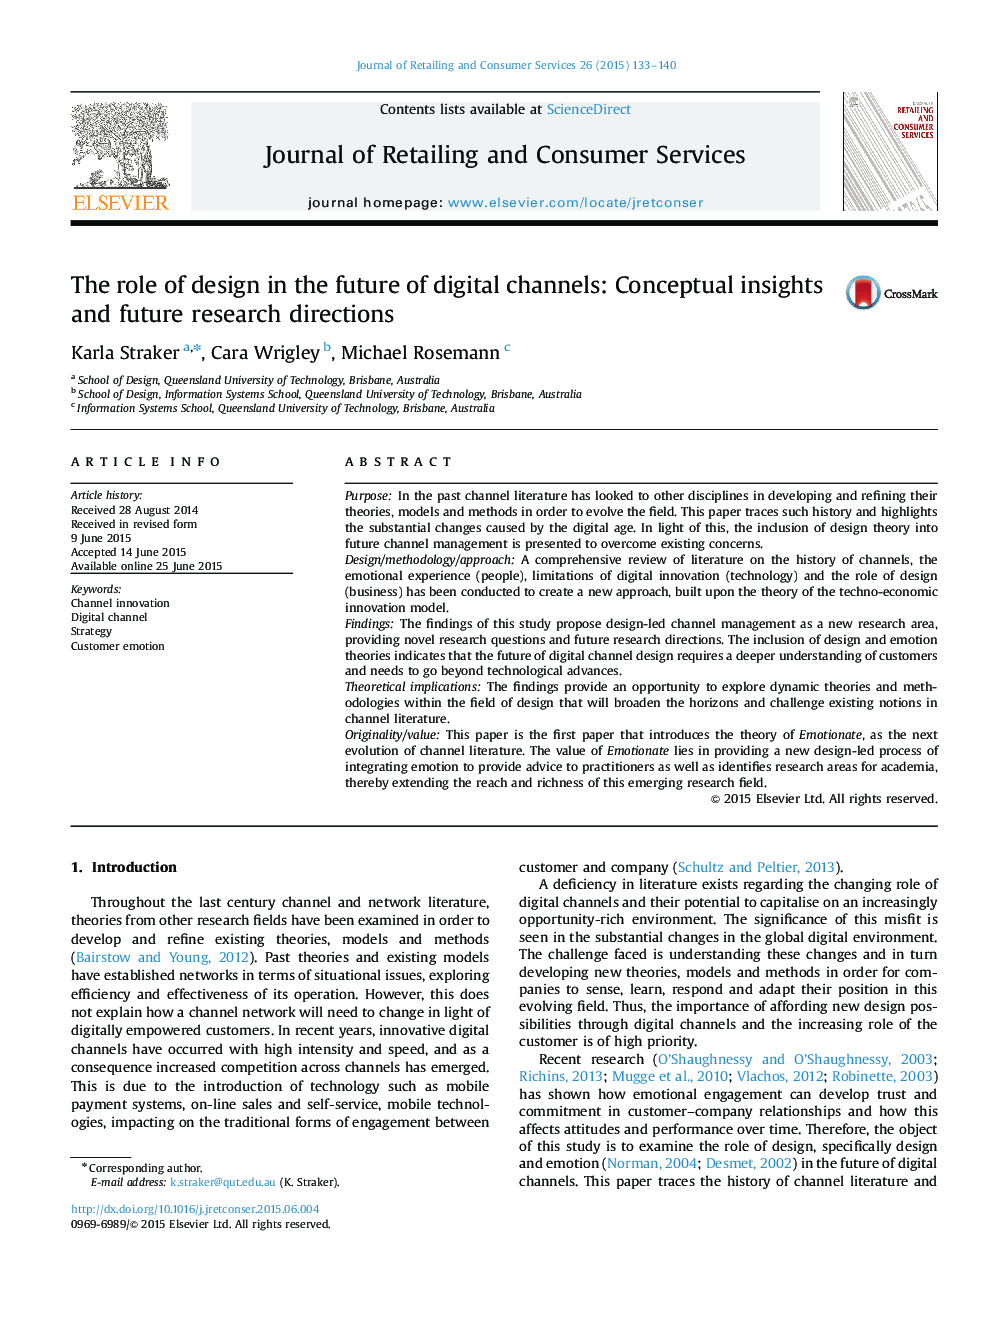 The role of design in the future of digital channels: Conceptual insights and future research directions